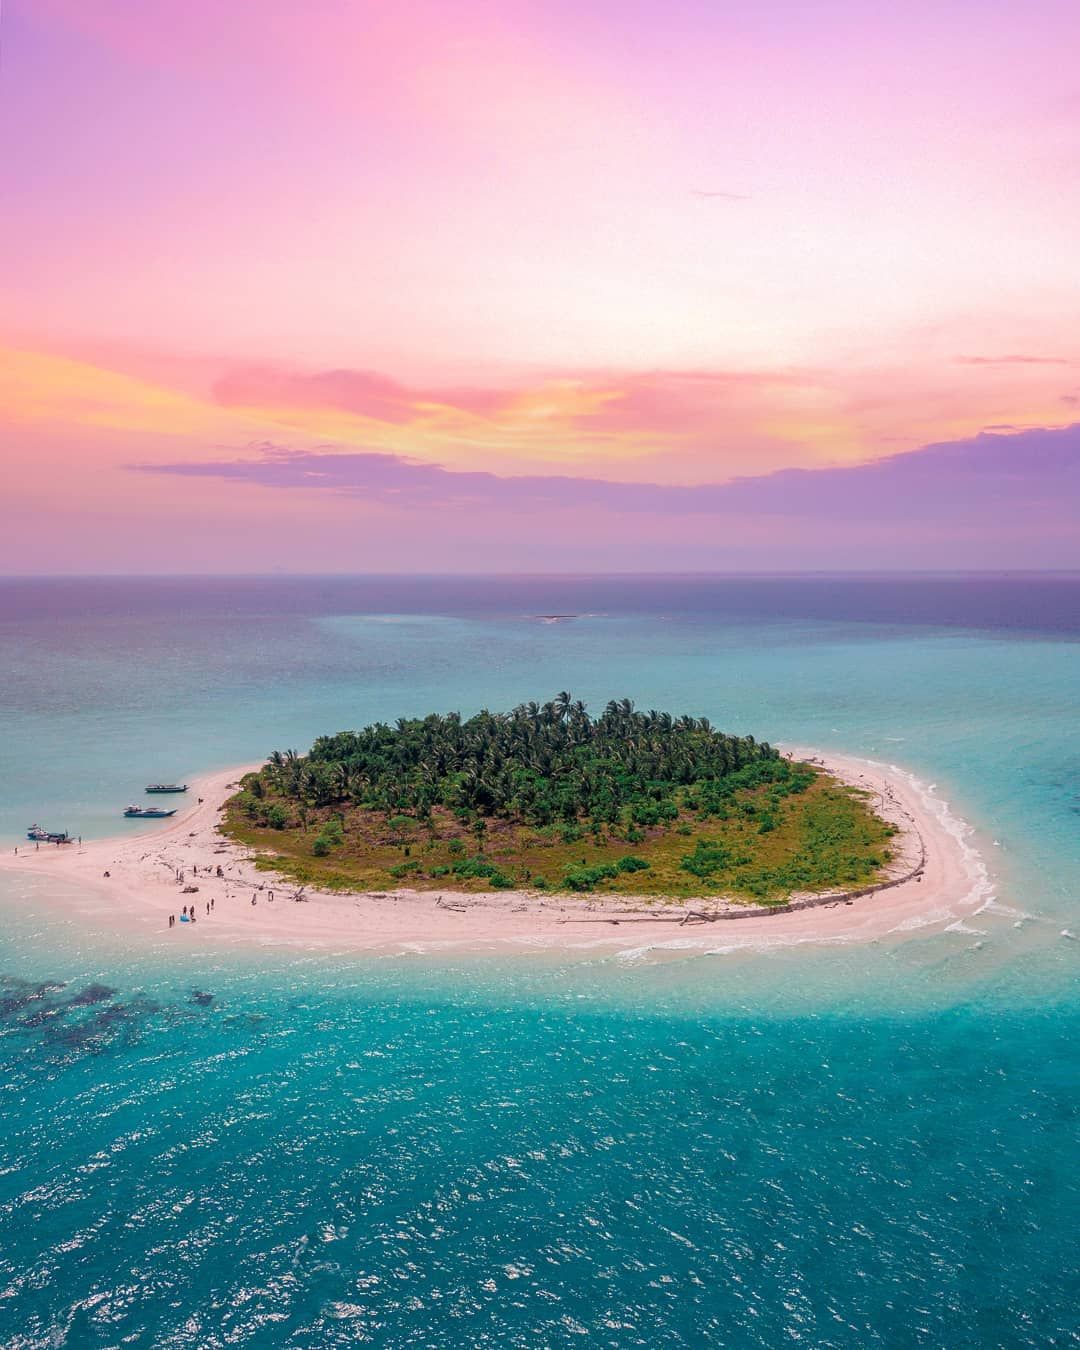 Indonesia From Above: Striking Drone Photography by Syamsudin Noor